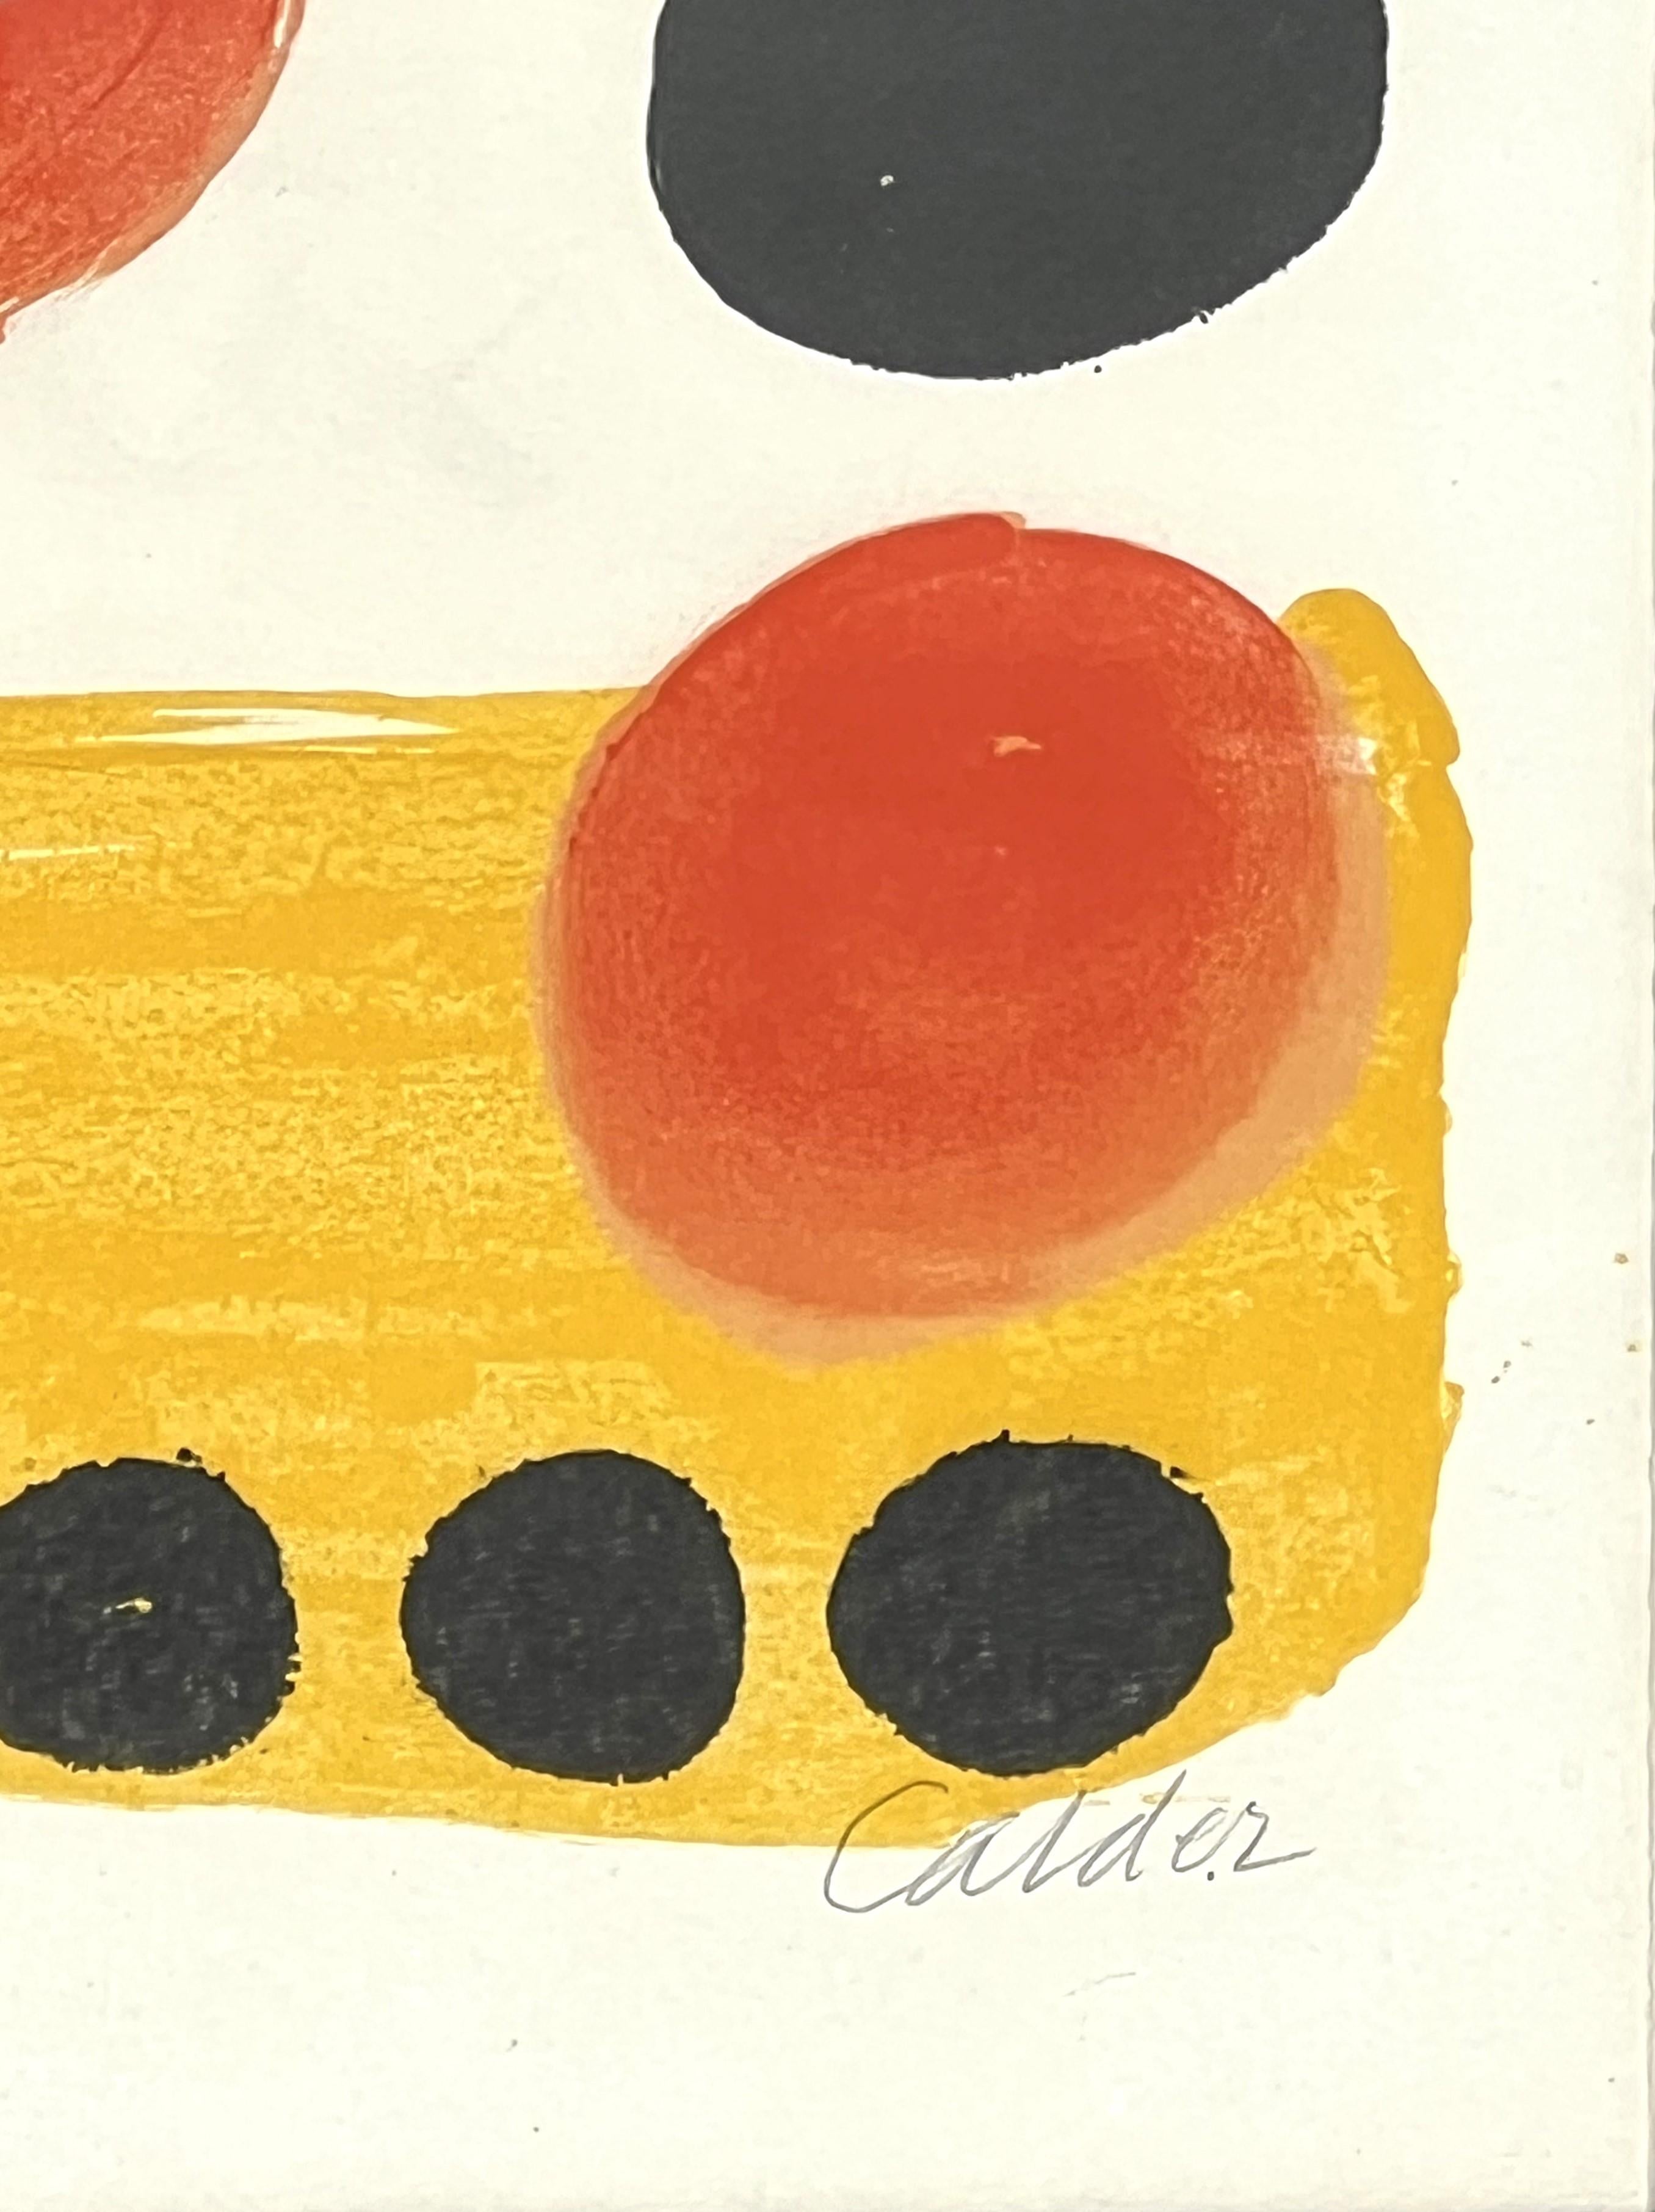 Modern abstract limited edition lithograph by American artist Alexander Calder. The work features black swirling lines intertwined around red, blue, and black circles. In 1967 the famed Parisian printing house and gallery, Atelier Mourlot, opened